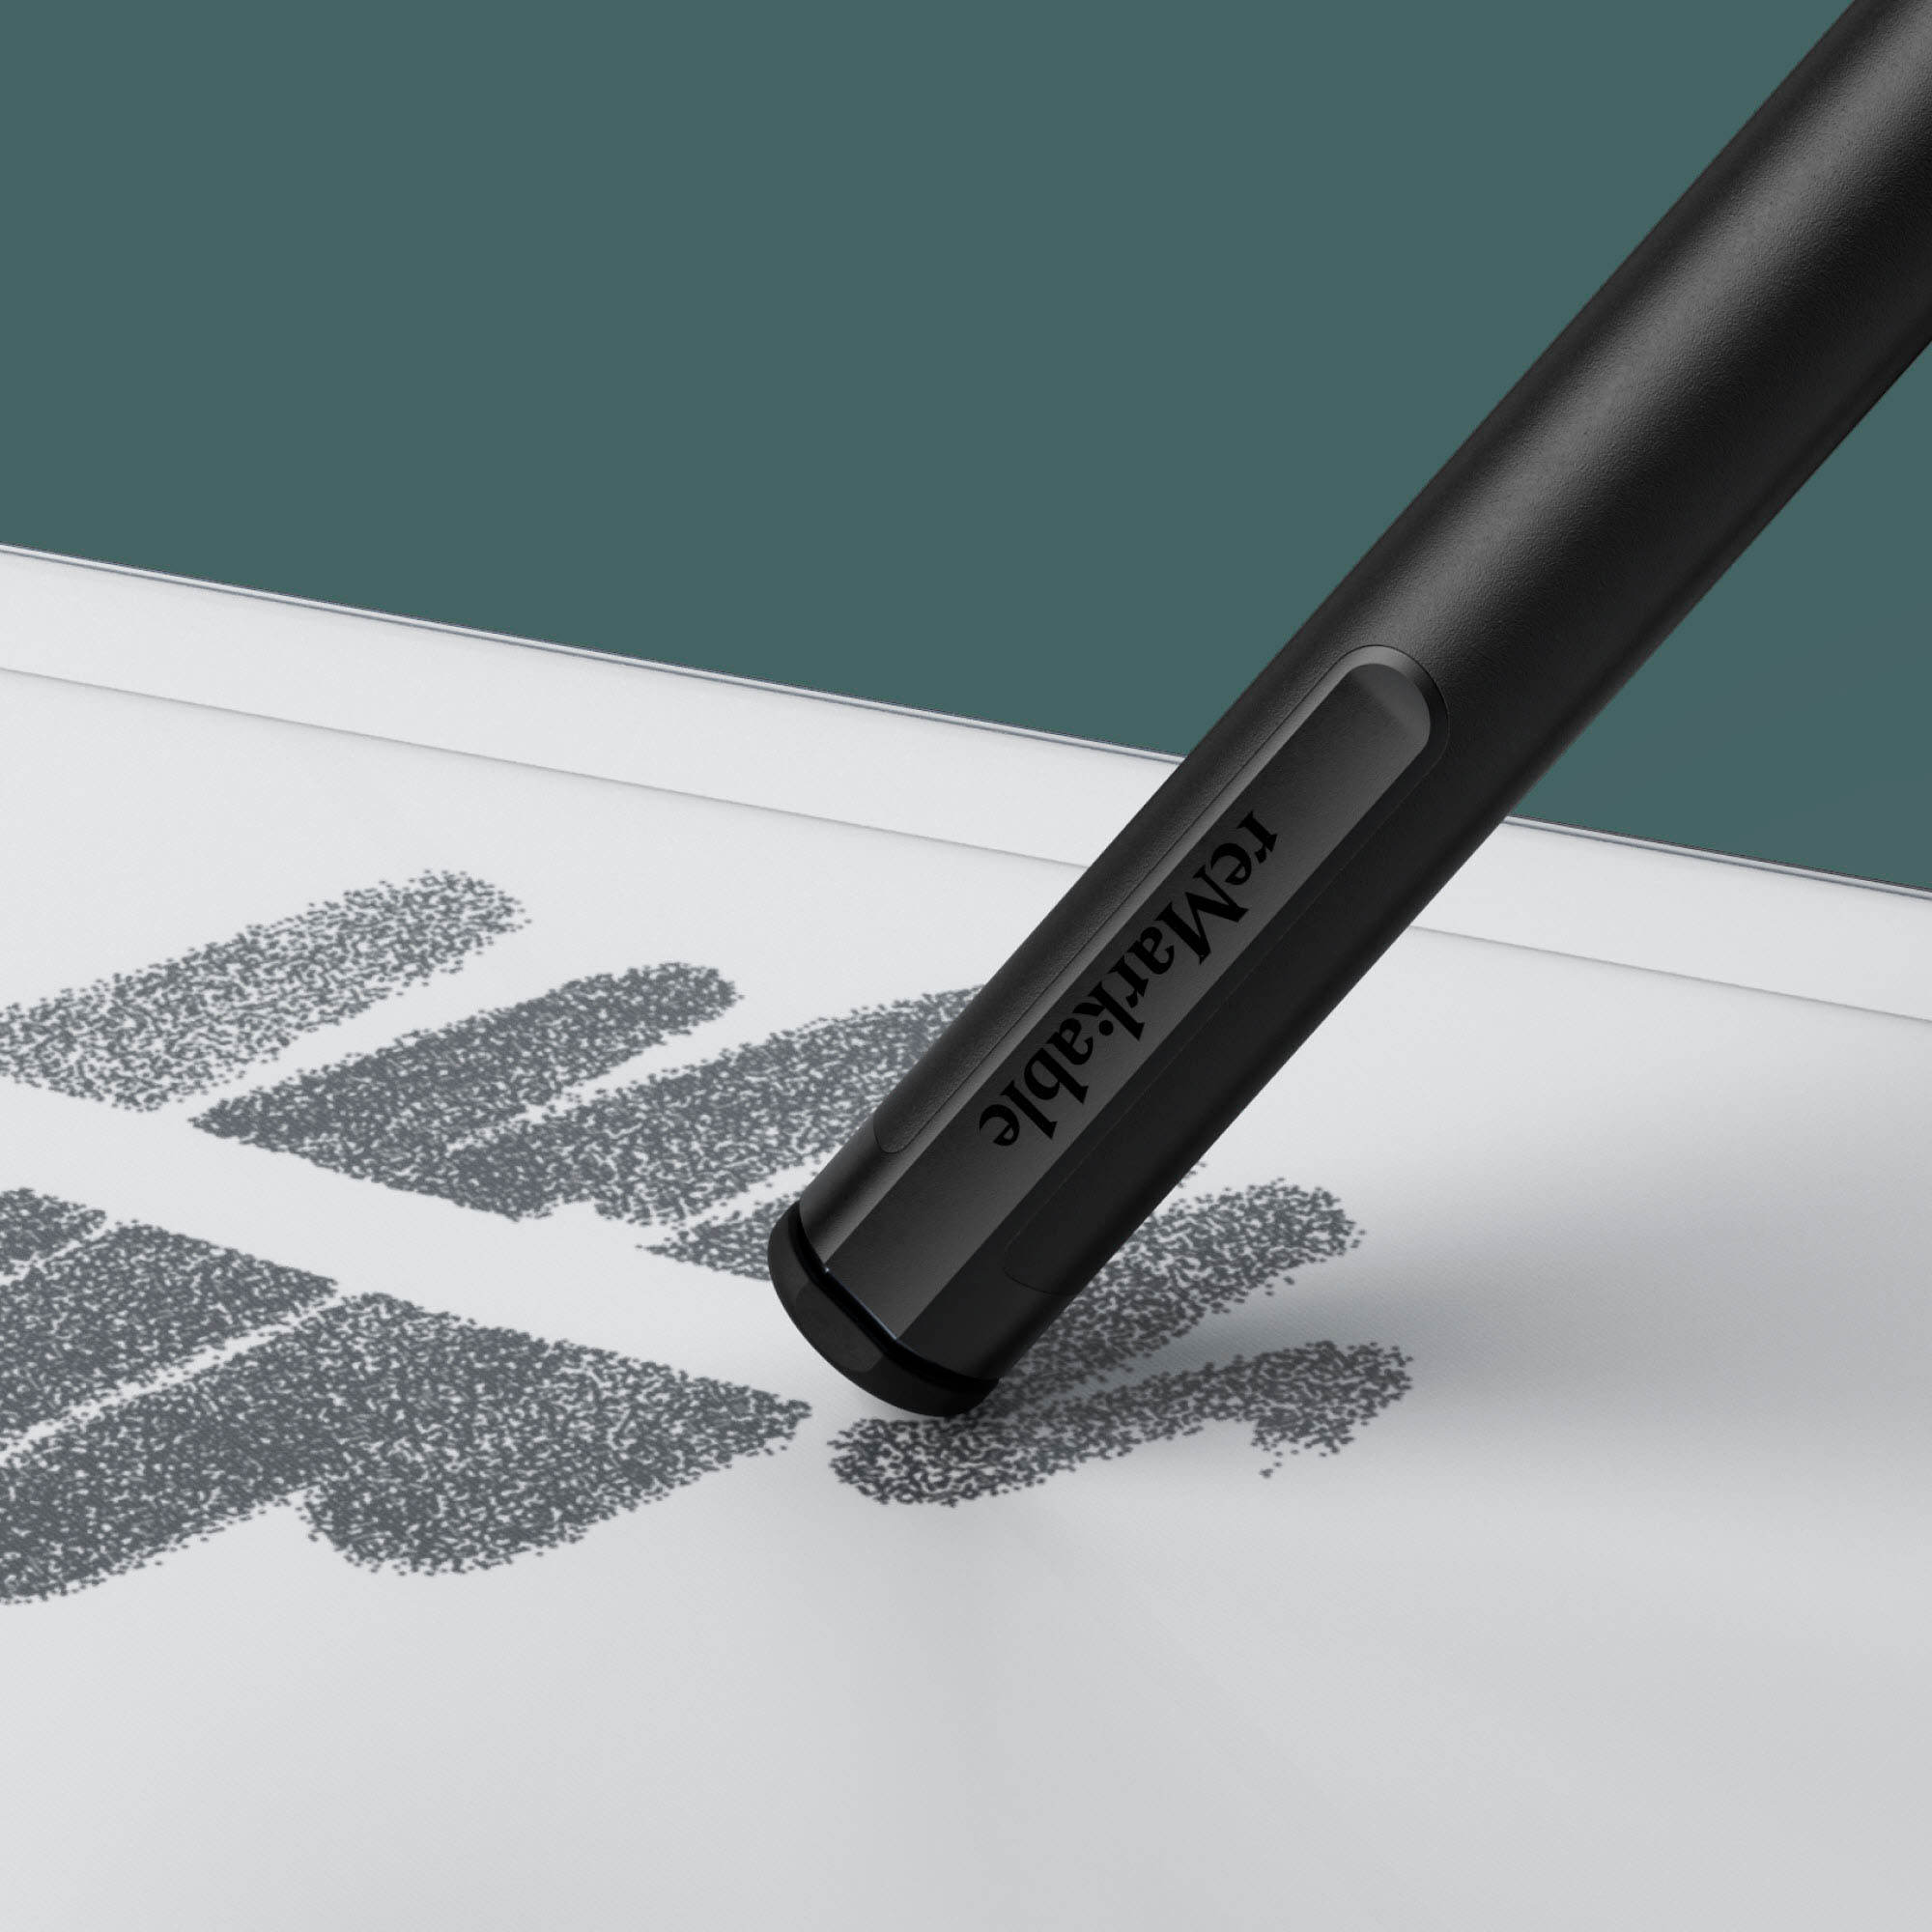 ReMarkable 2 is the best paper-like tablet for sketching and notes